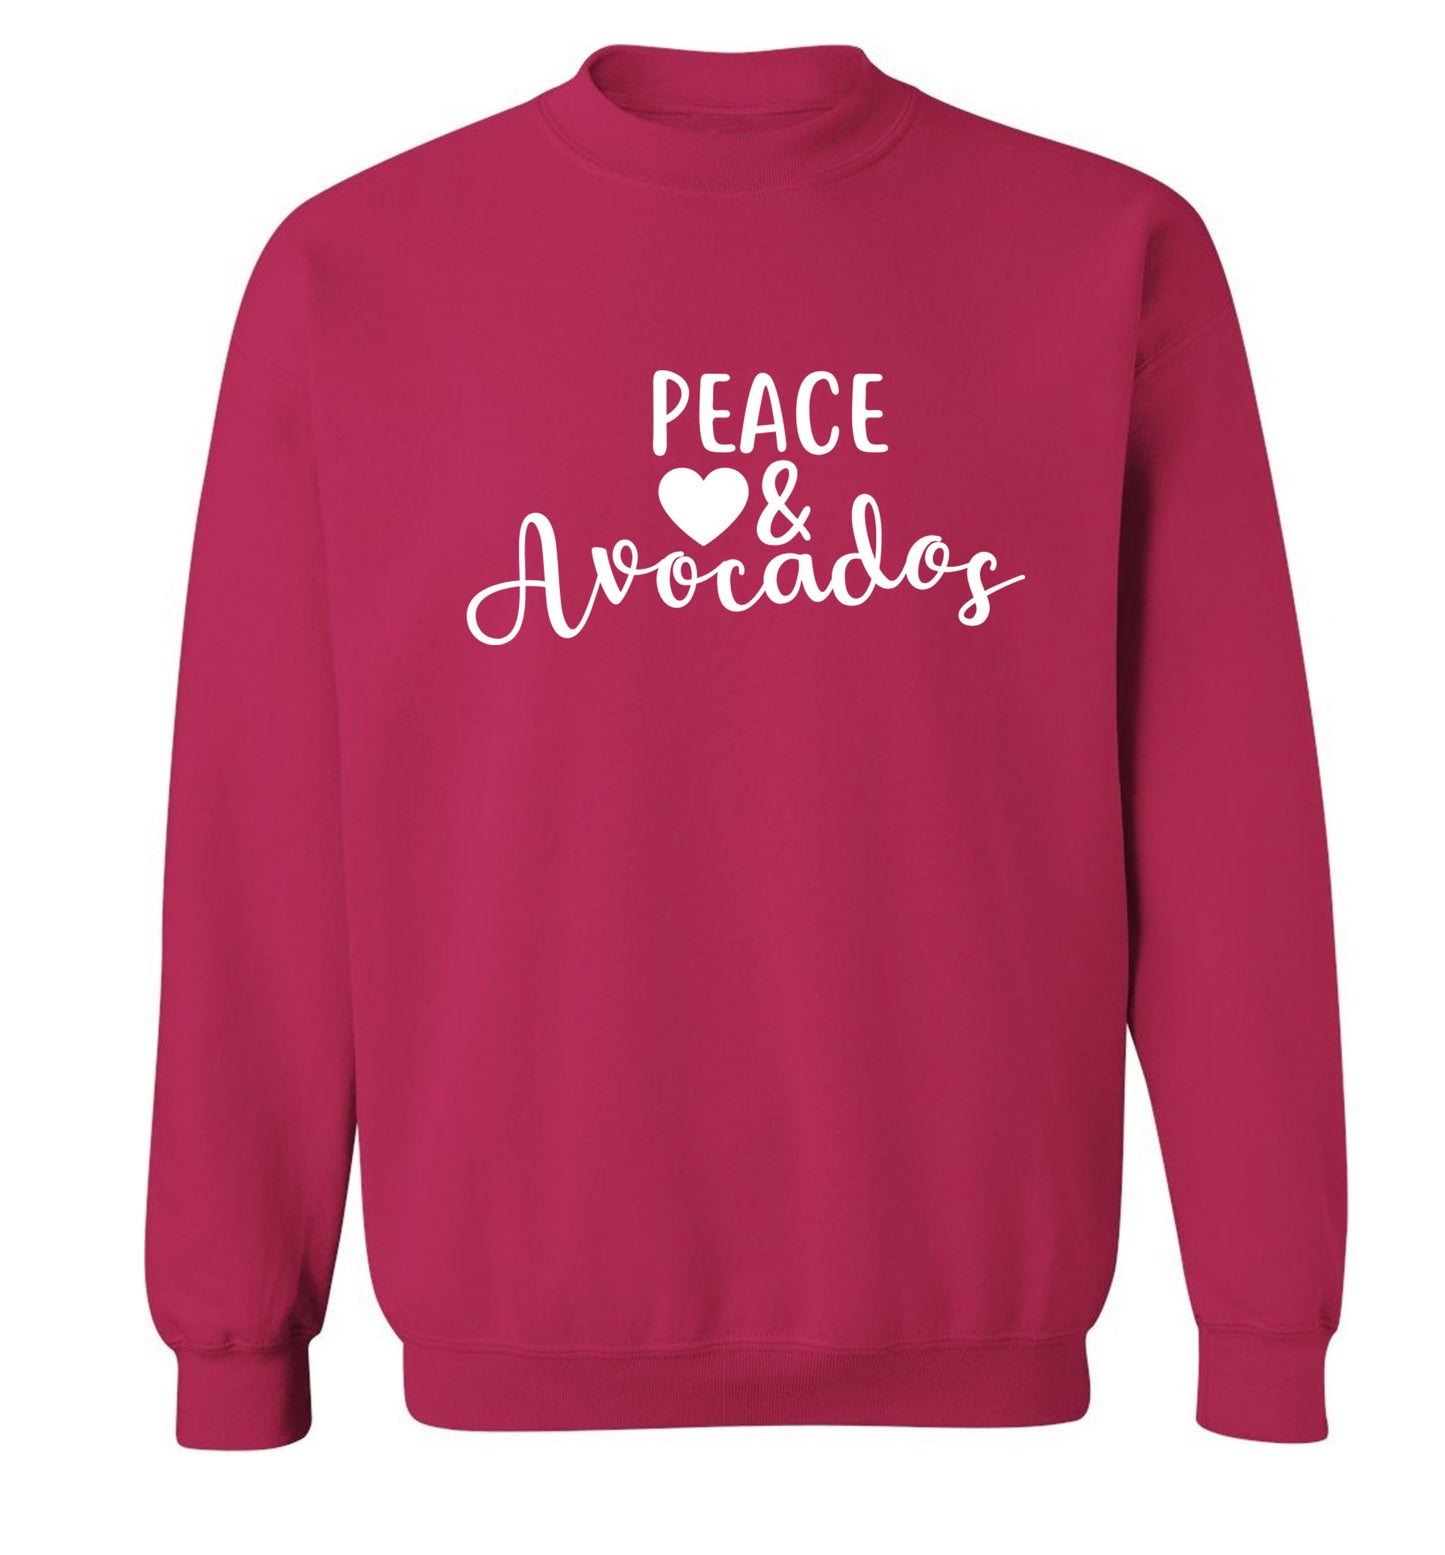 Peace love and avocados Adult's unisex pink Sweater 2XL